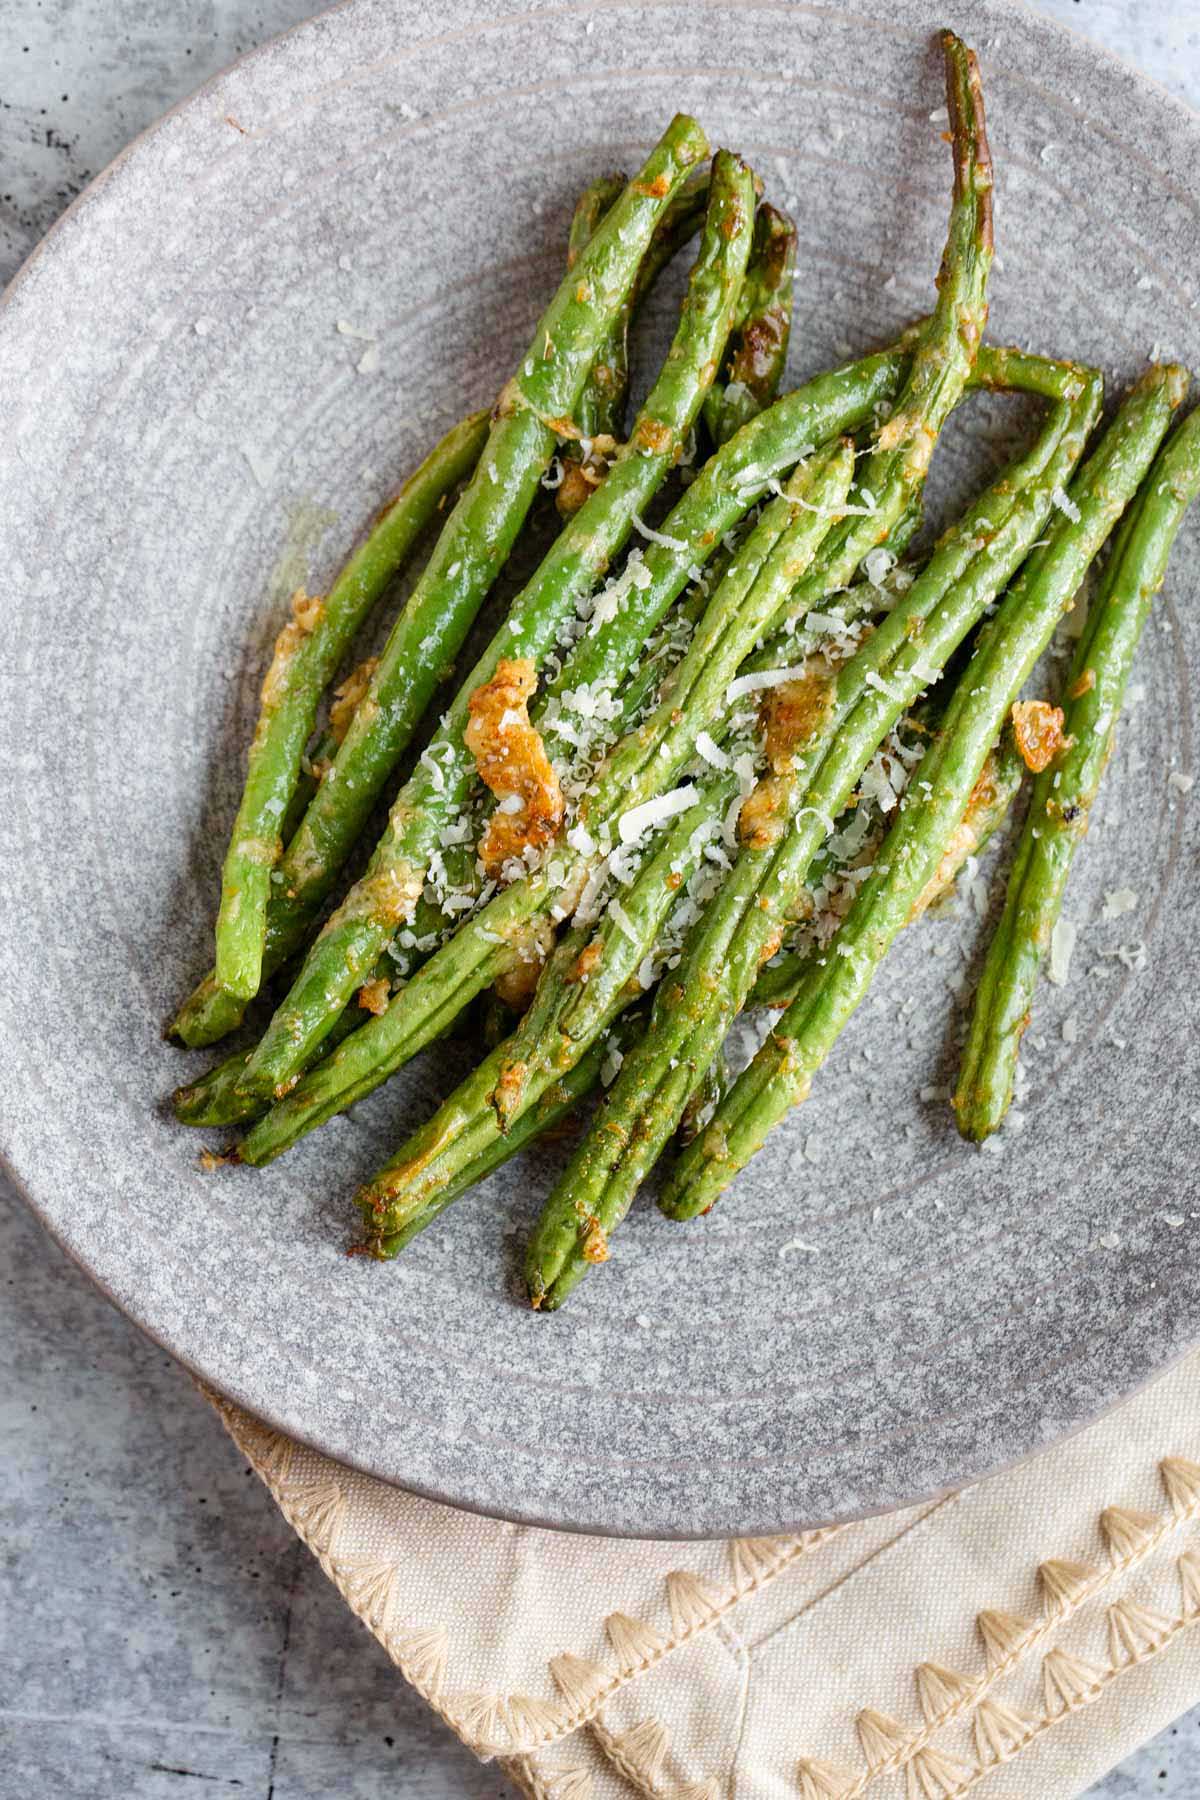 Cooked green beans on a plate.